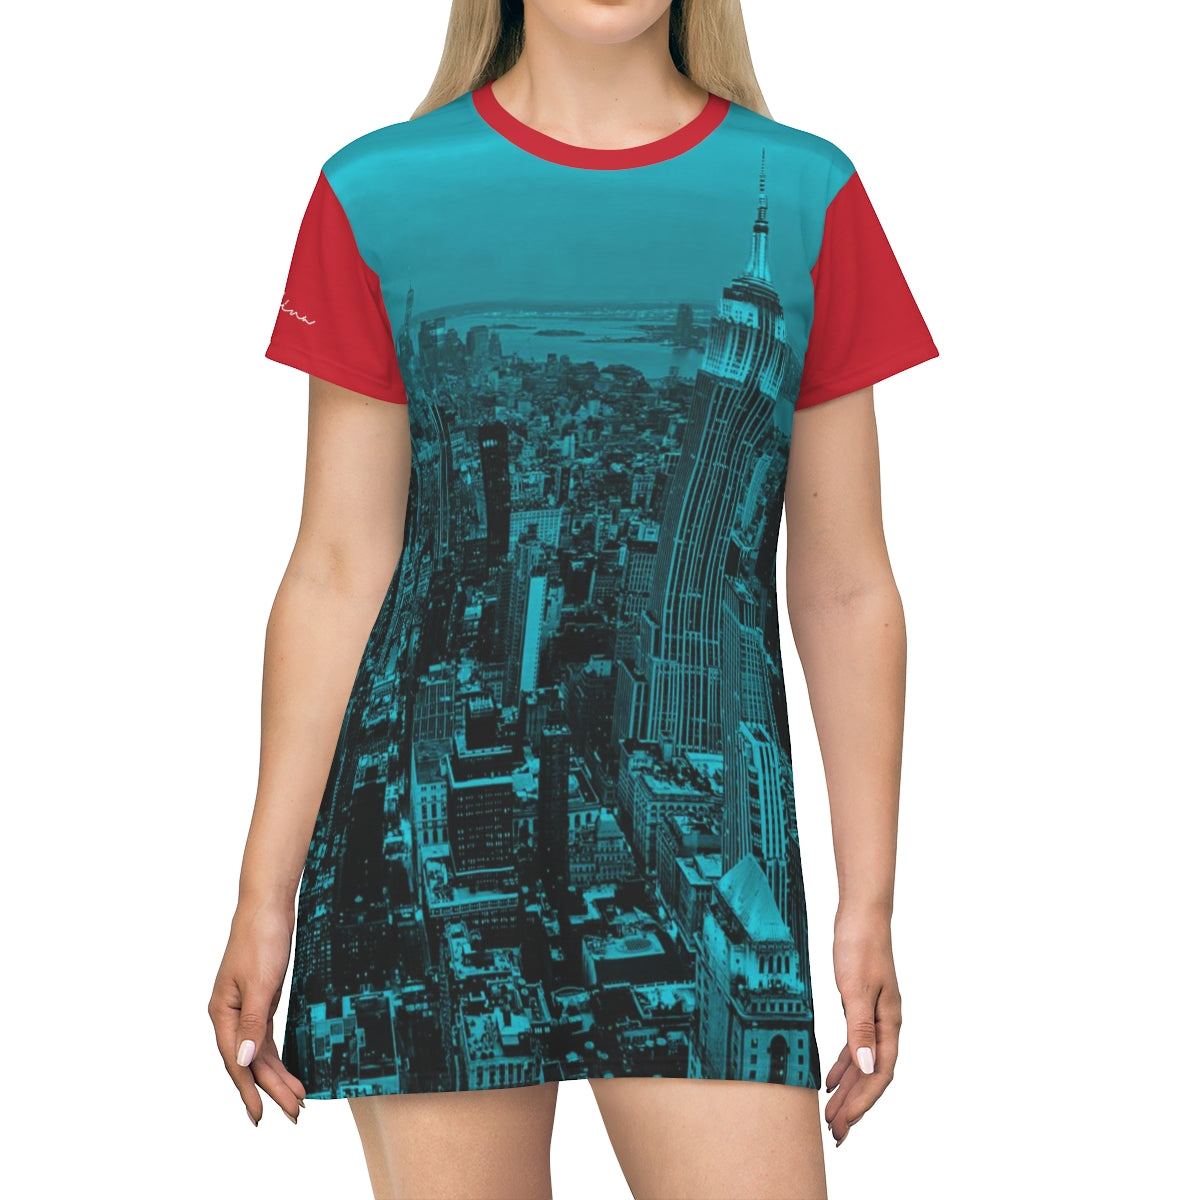 Shirtdress, Red-Turquoise NYC View